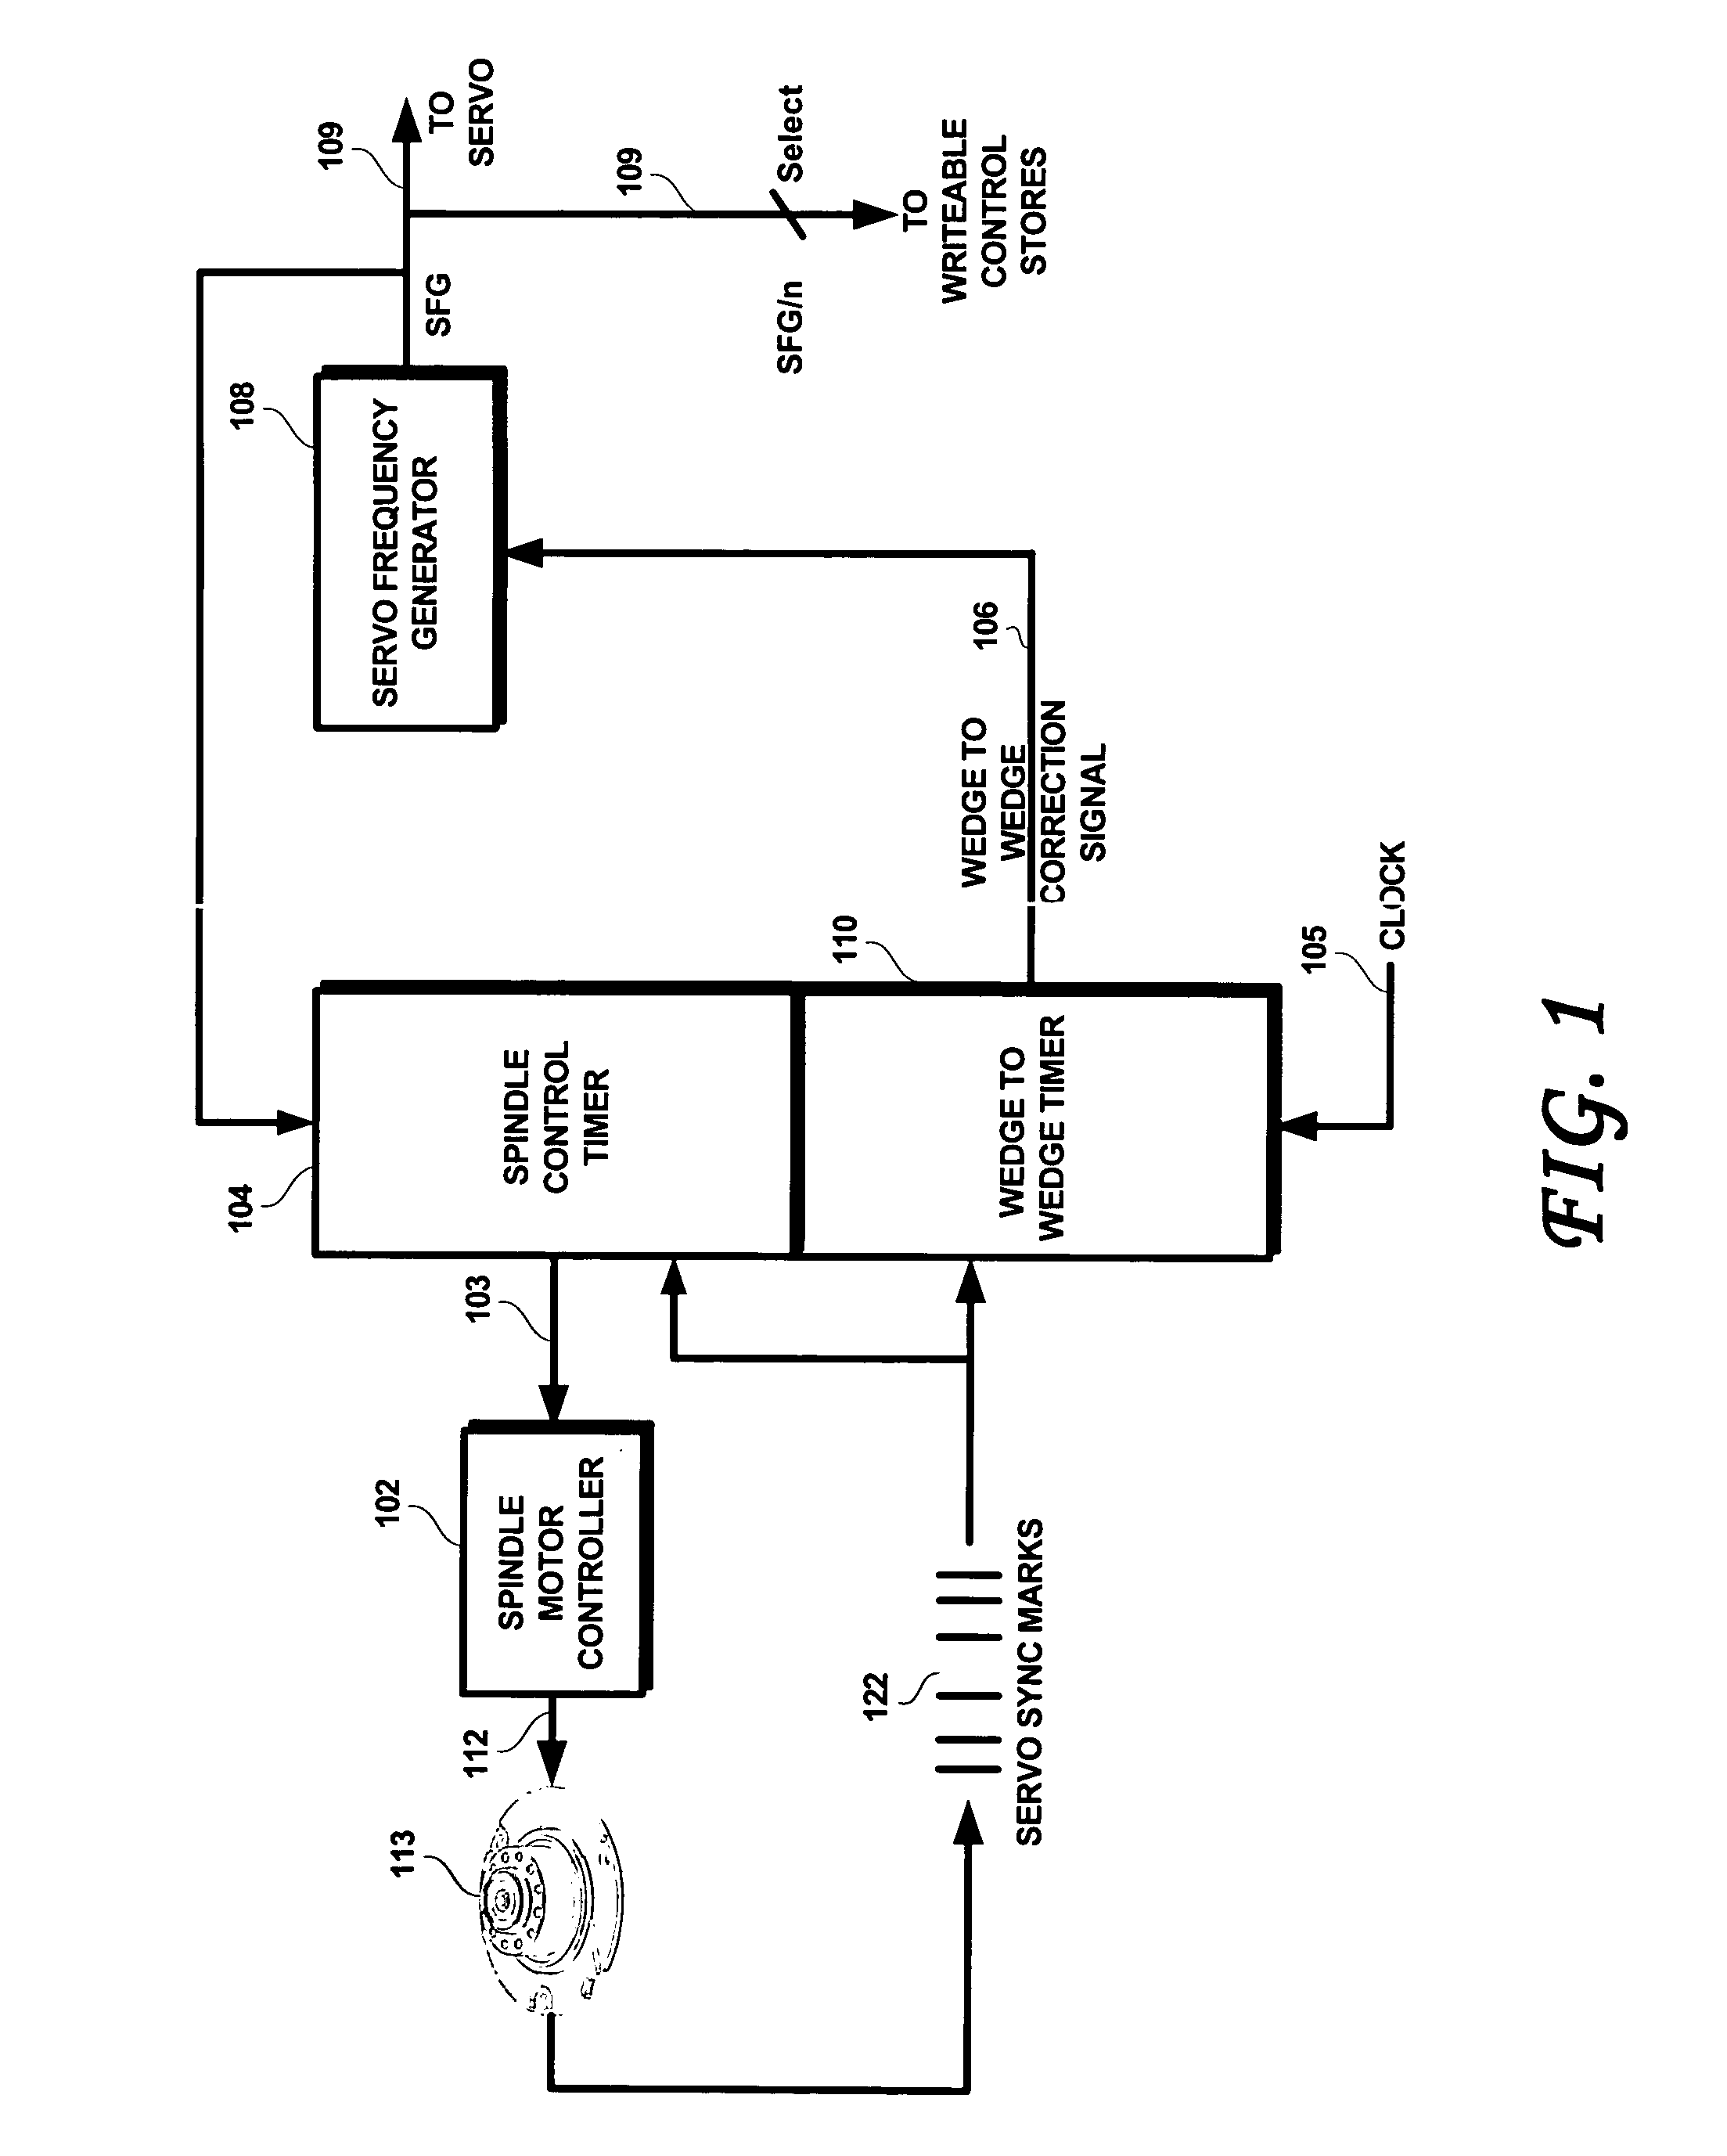 Disk drives and disk drive containing devices that include a servo frequency generator and spindle control timer that compensate for disk eccentricity